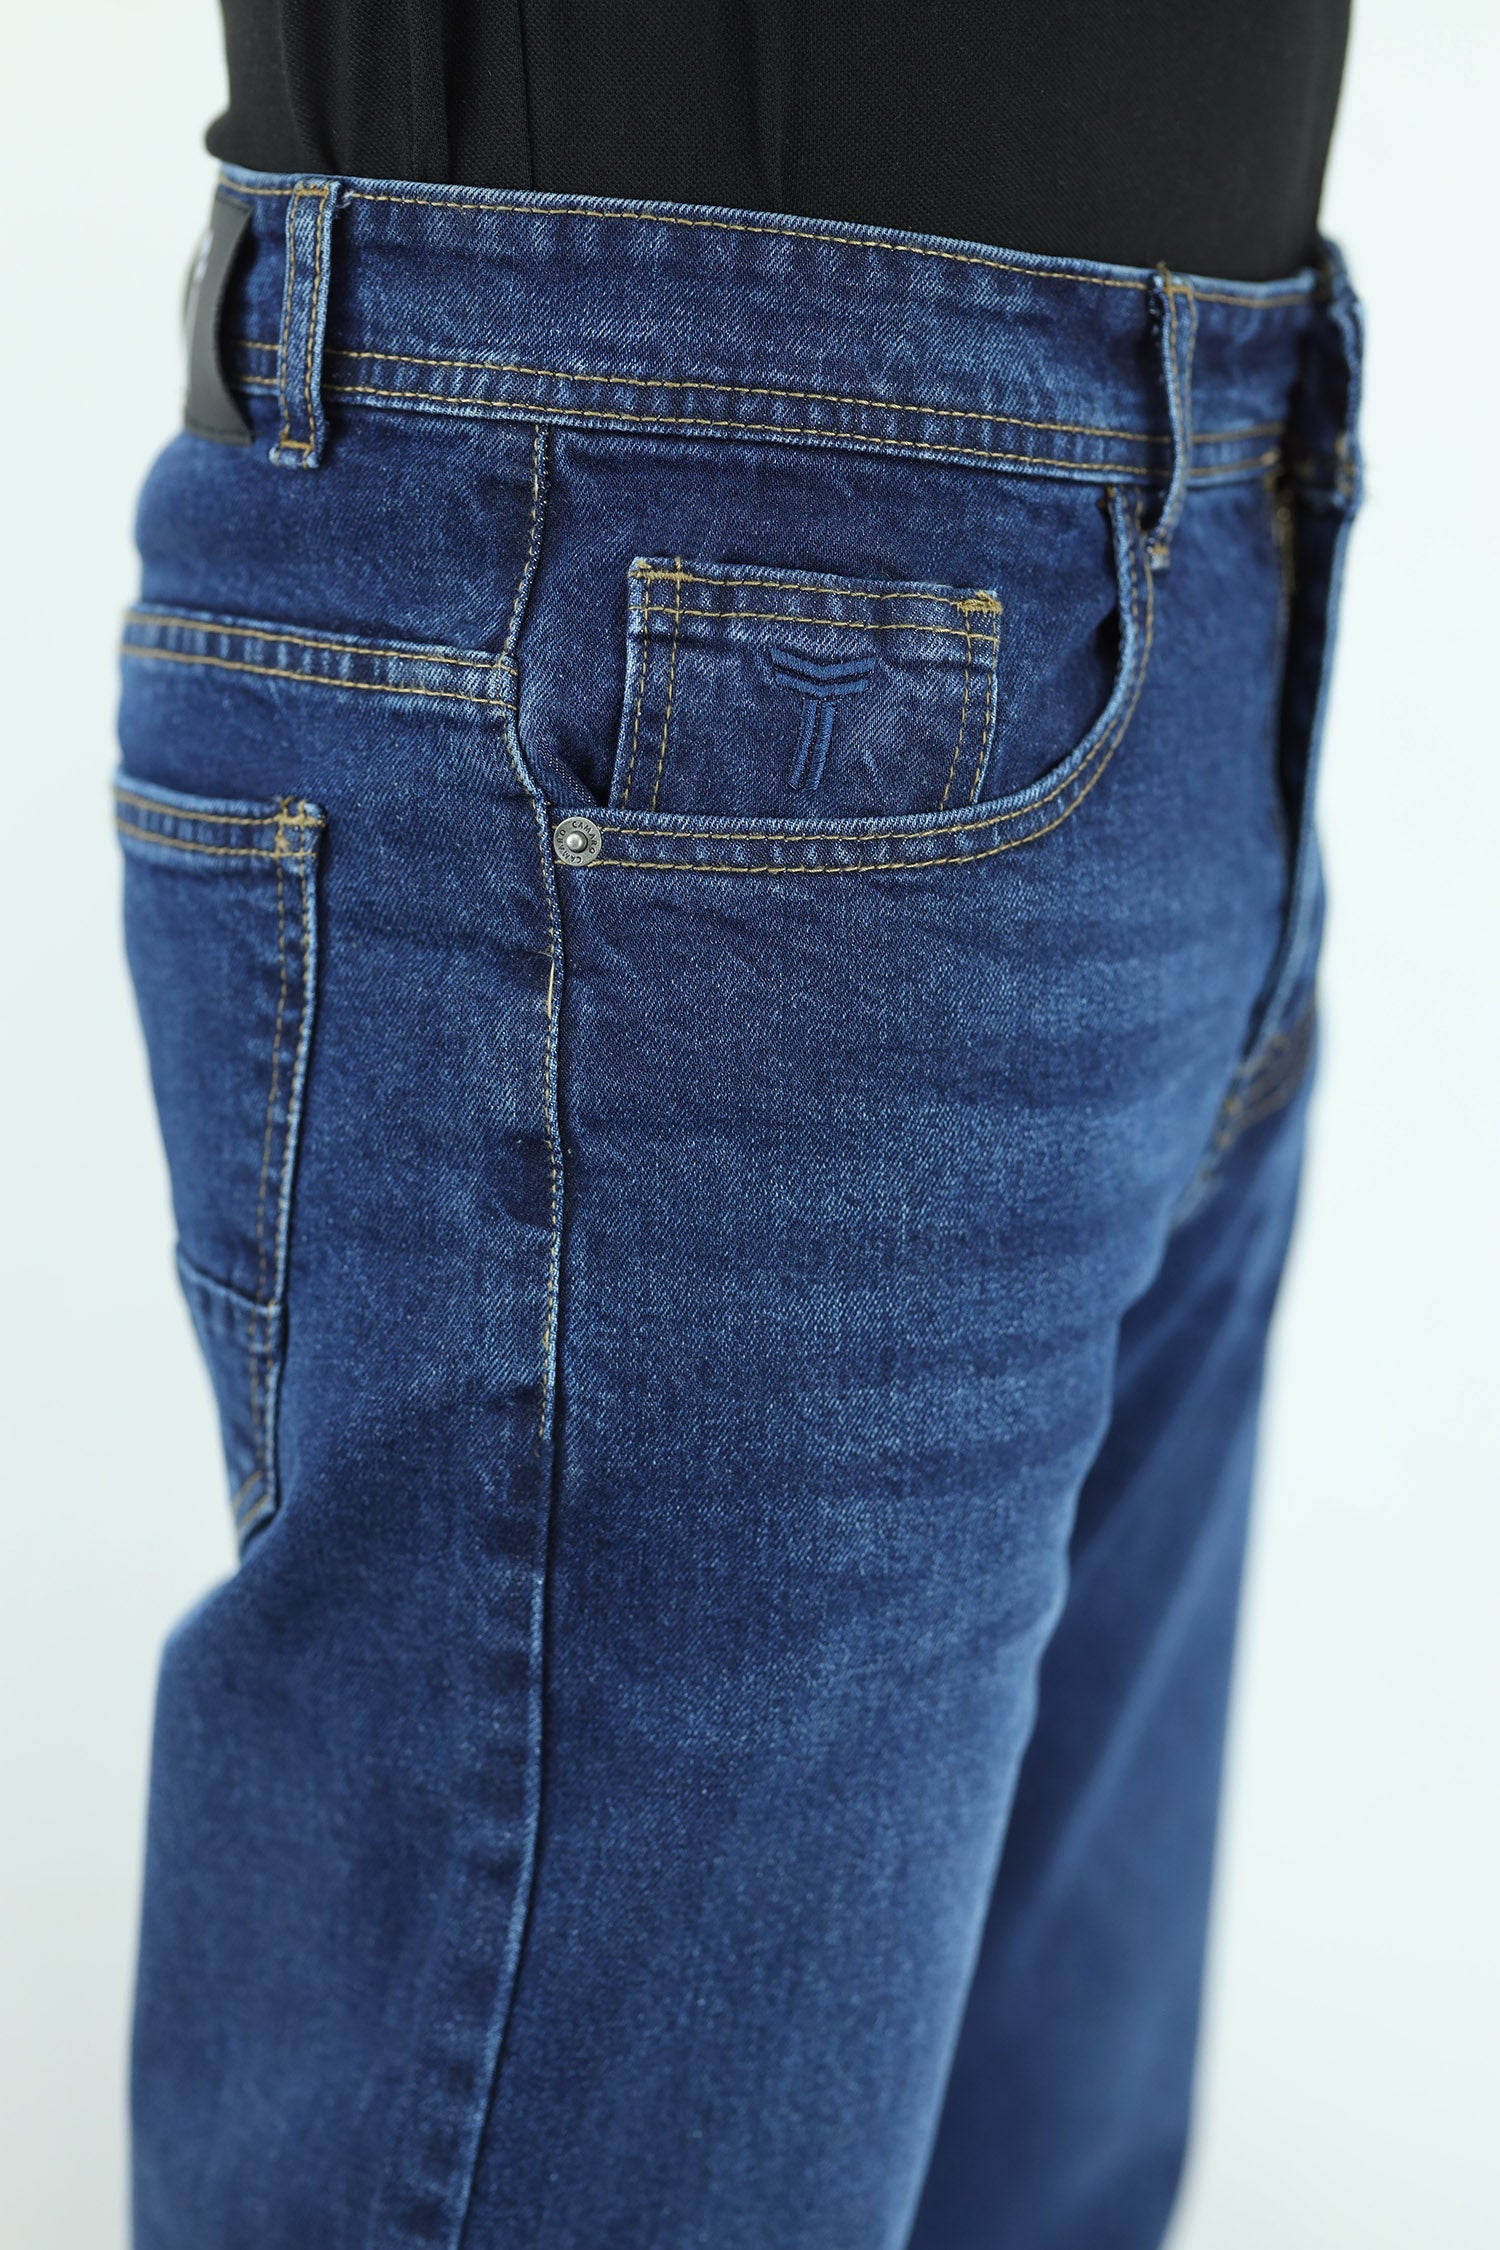 Loose Bottom Turbo Jeans in Navy Blue